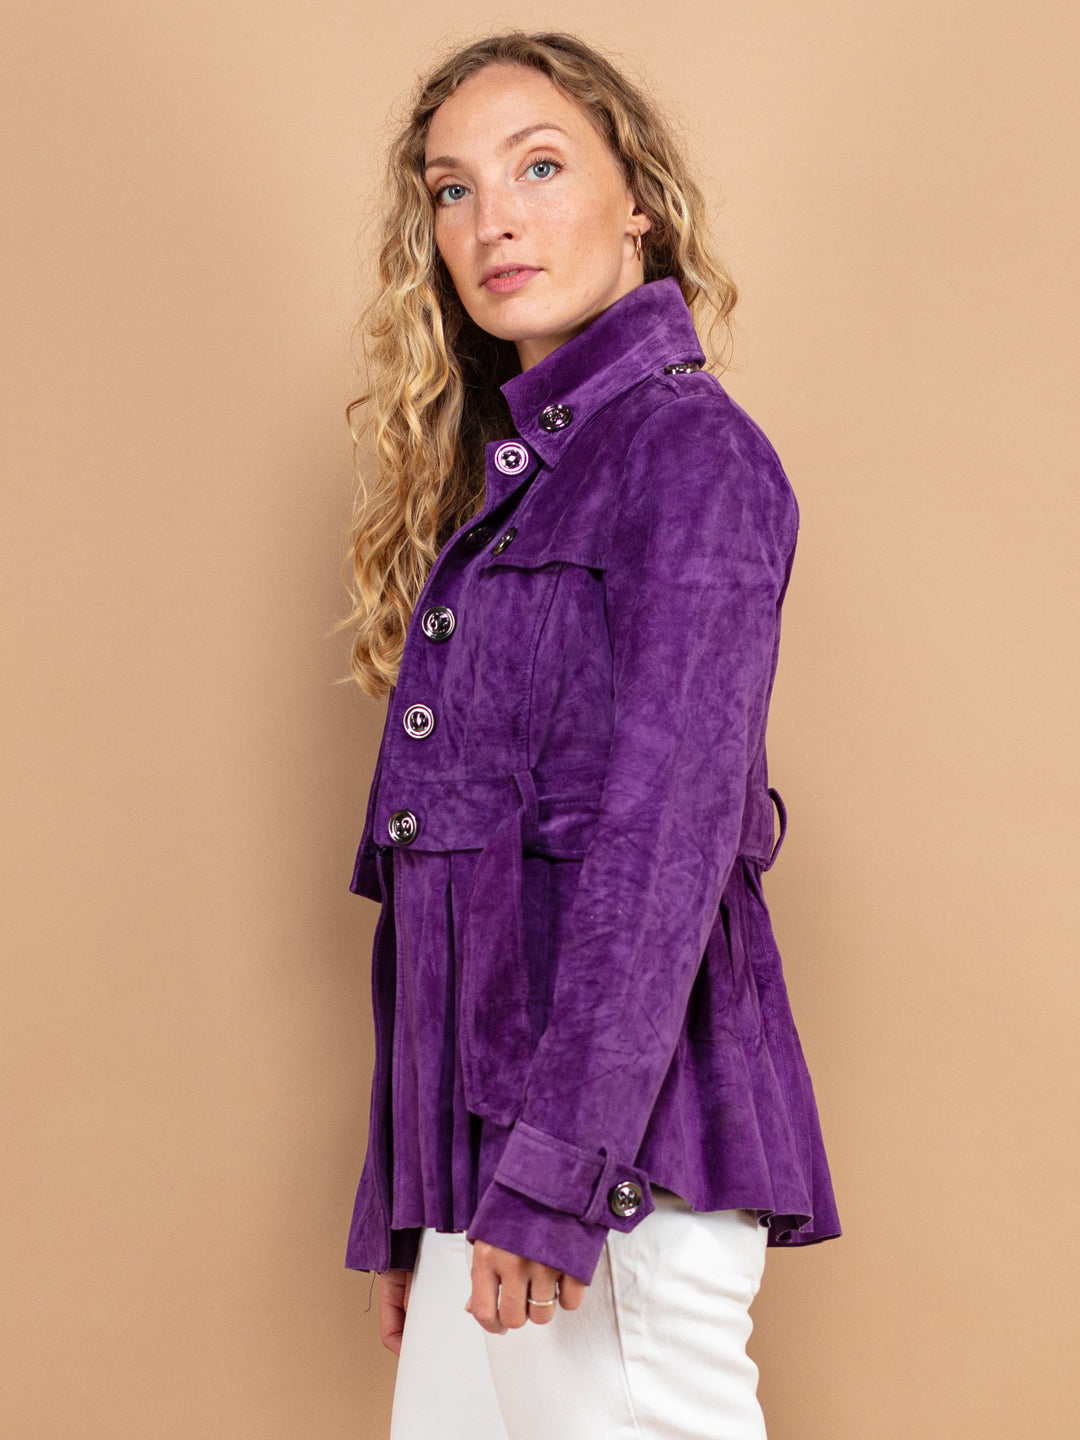 Purple Suede Jacket, Women Size Extra Small S Suede Jacket, Retro Chic Jacket, Western Suede Jacket, Vintage Women Clothing, Y2K Outerwear